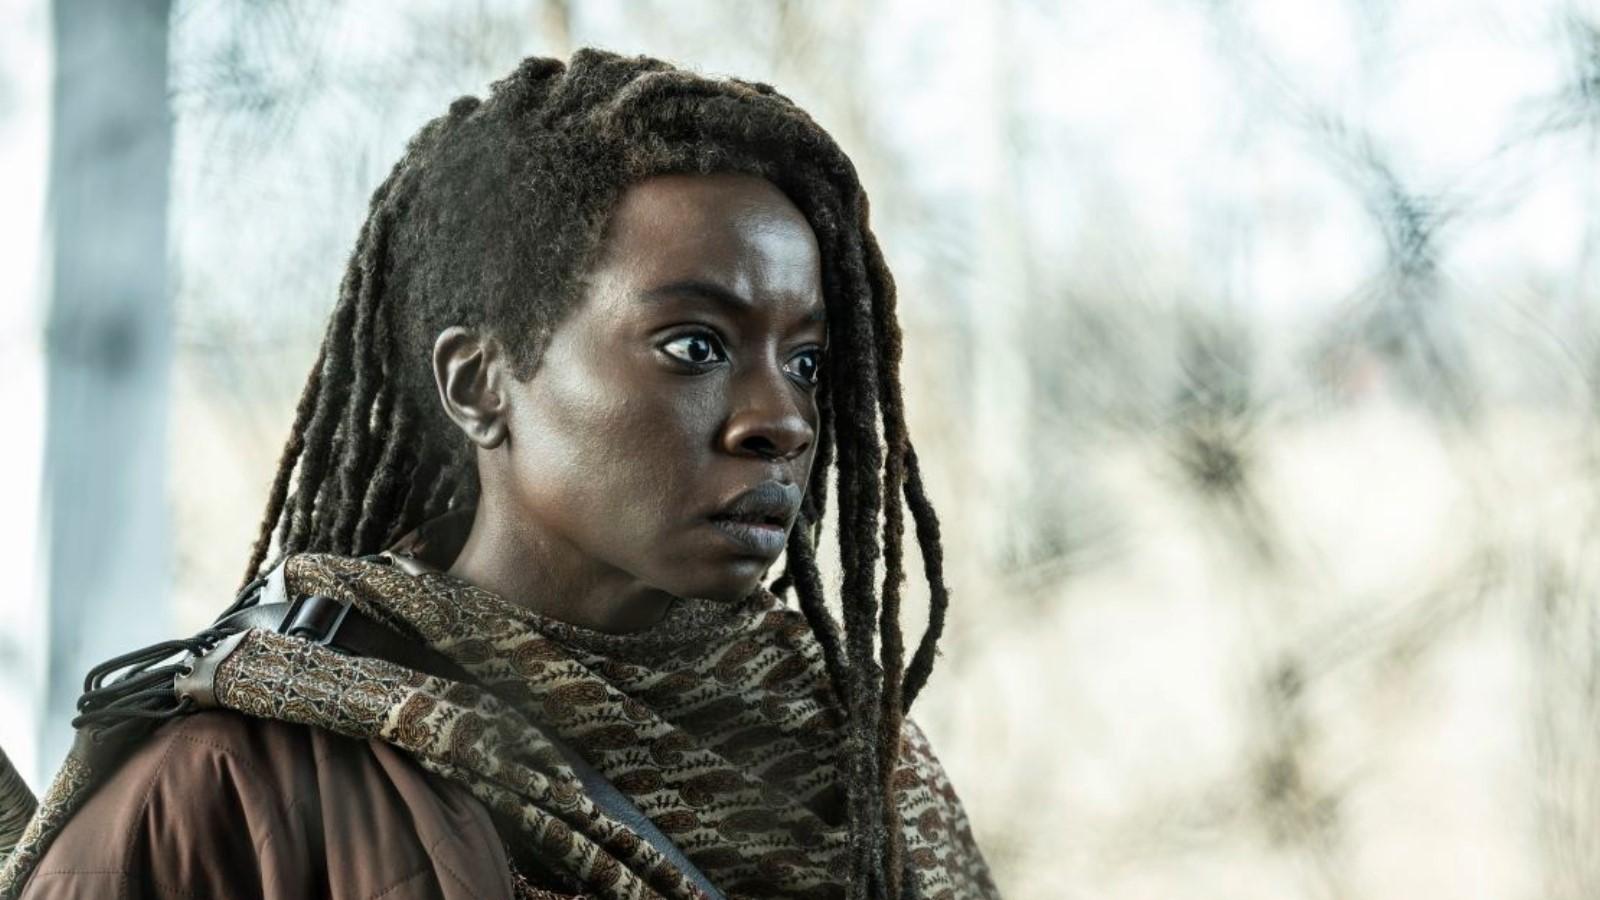 Danai Gurira as Michonne in The Walking Dead: The Ones Who Live